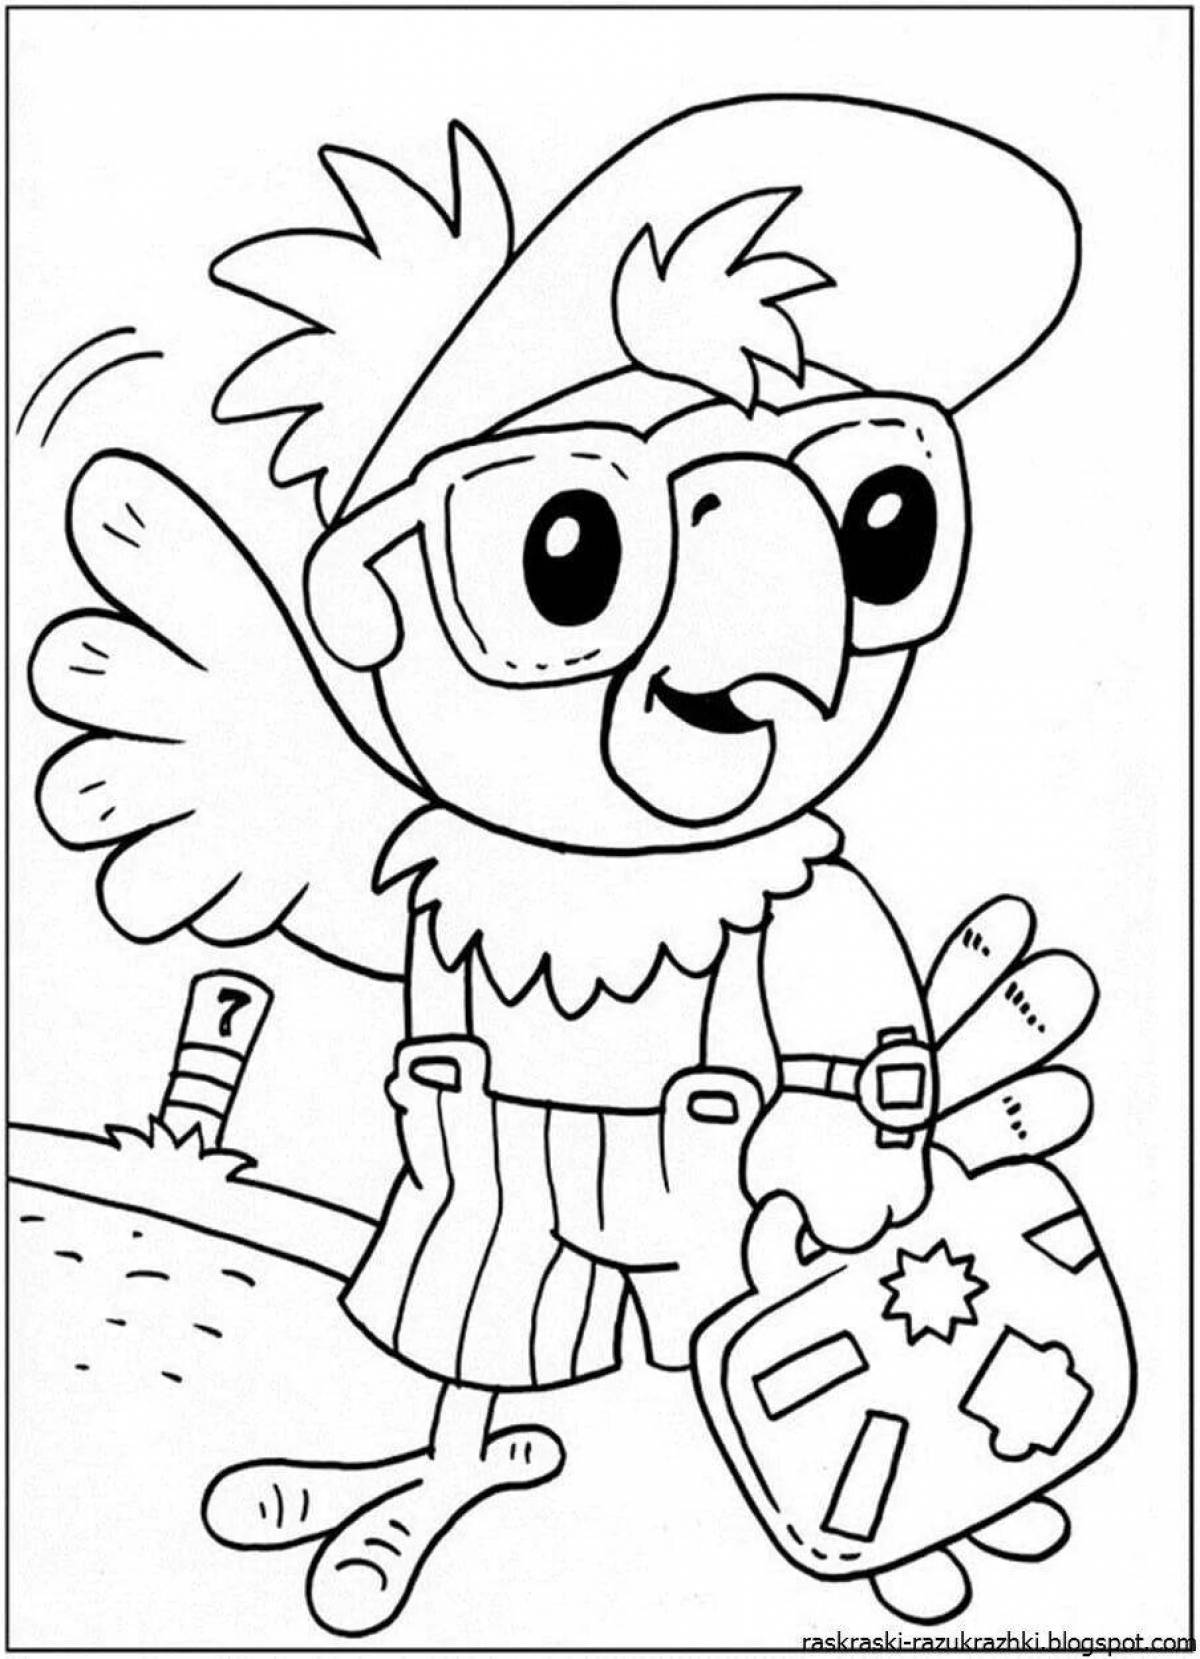 Crazy cartoon coloring book for 4-5 year olds